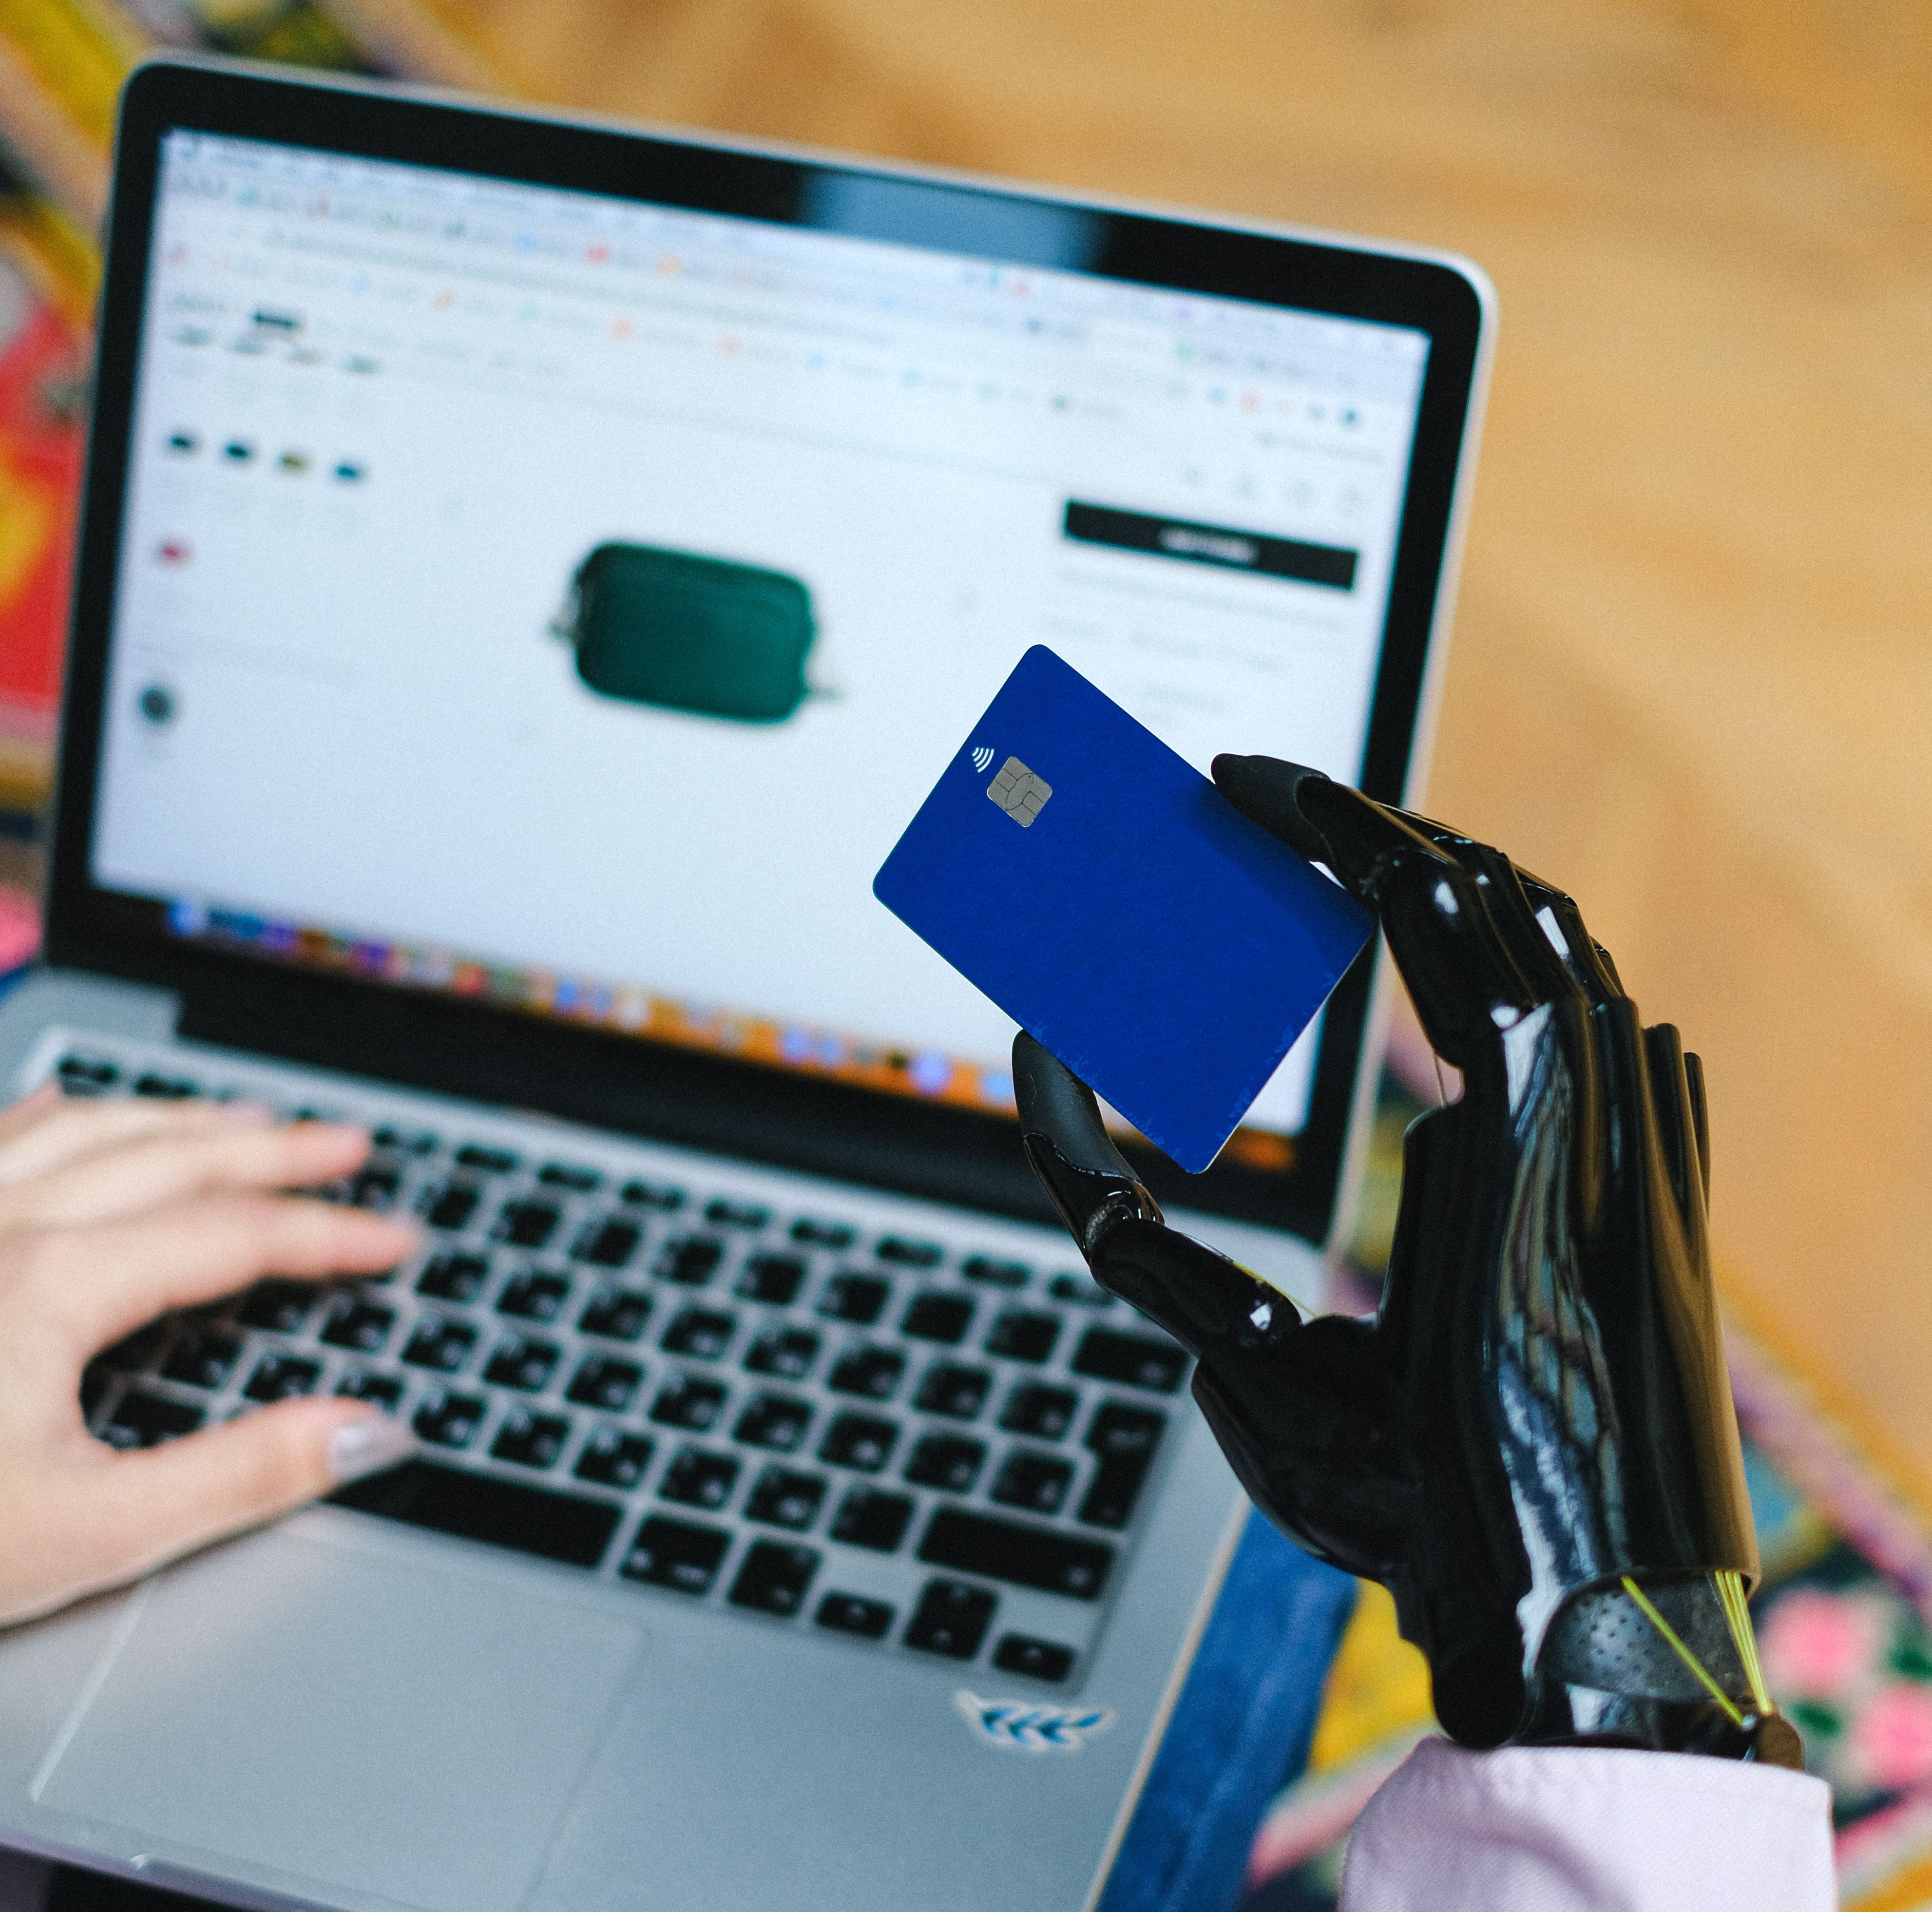 Image shows someone holding a credit card in front of a laptop screen. The hand is a prosthetic limb.